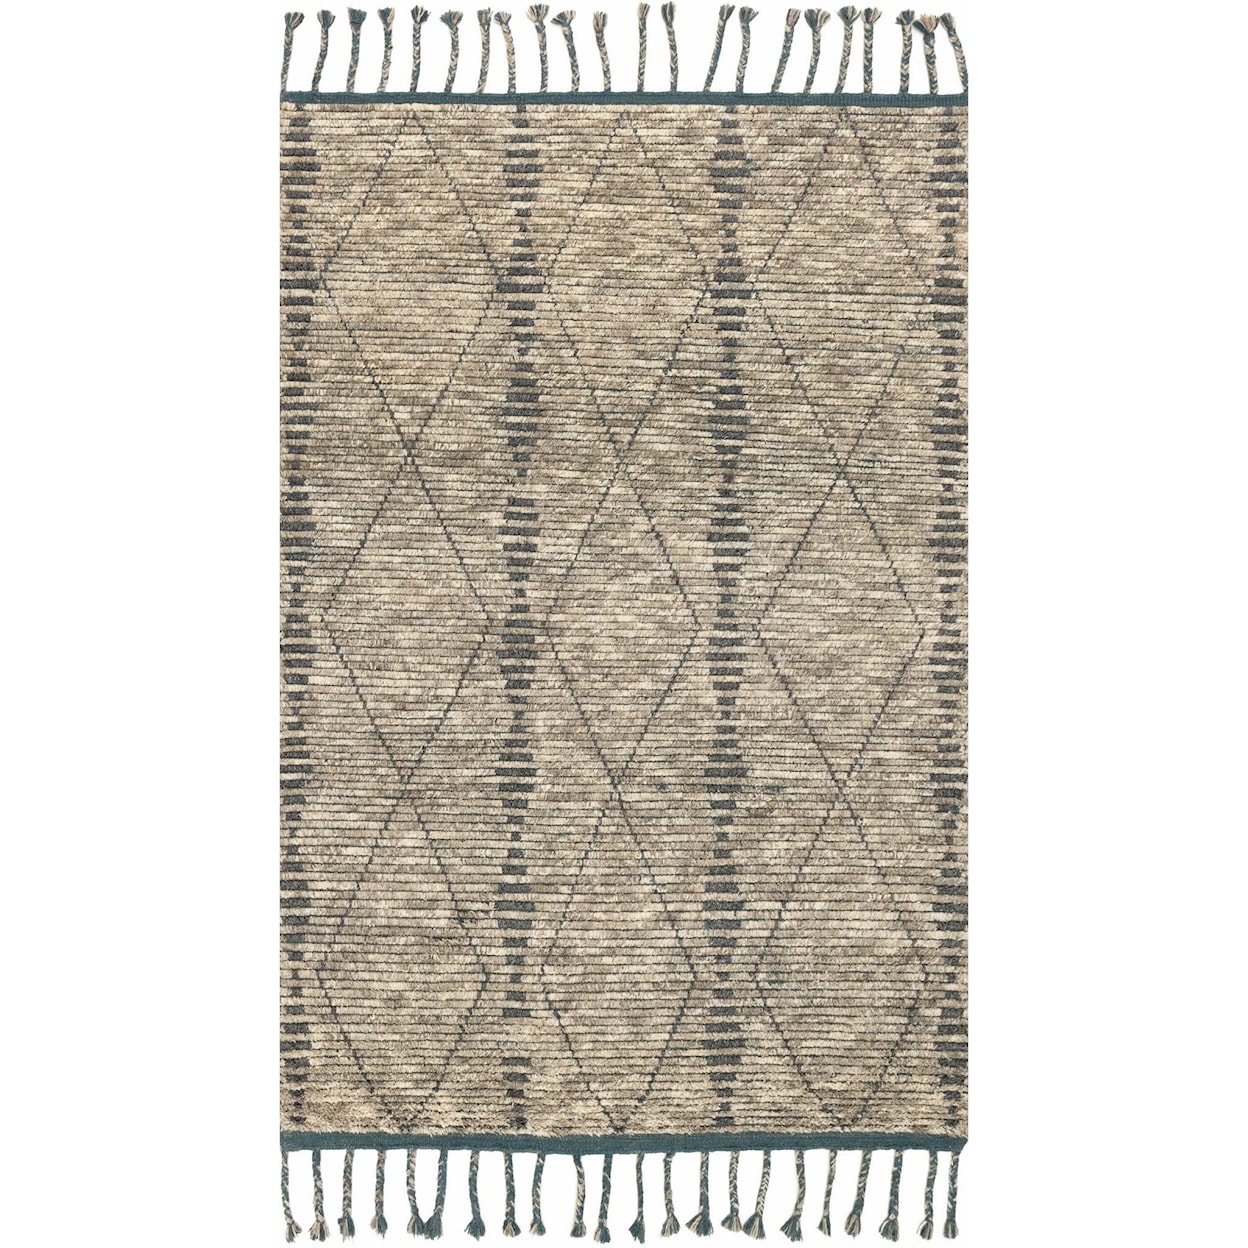 Magnolia Home by Joanna Gaines for Loloi Tulum 9' 6" x 13' 6" Rectangle Rug